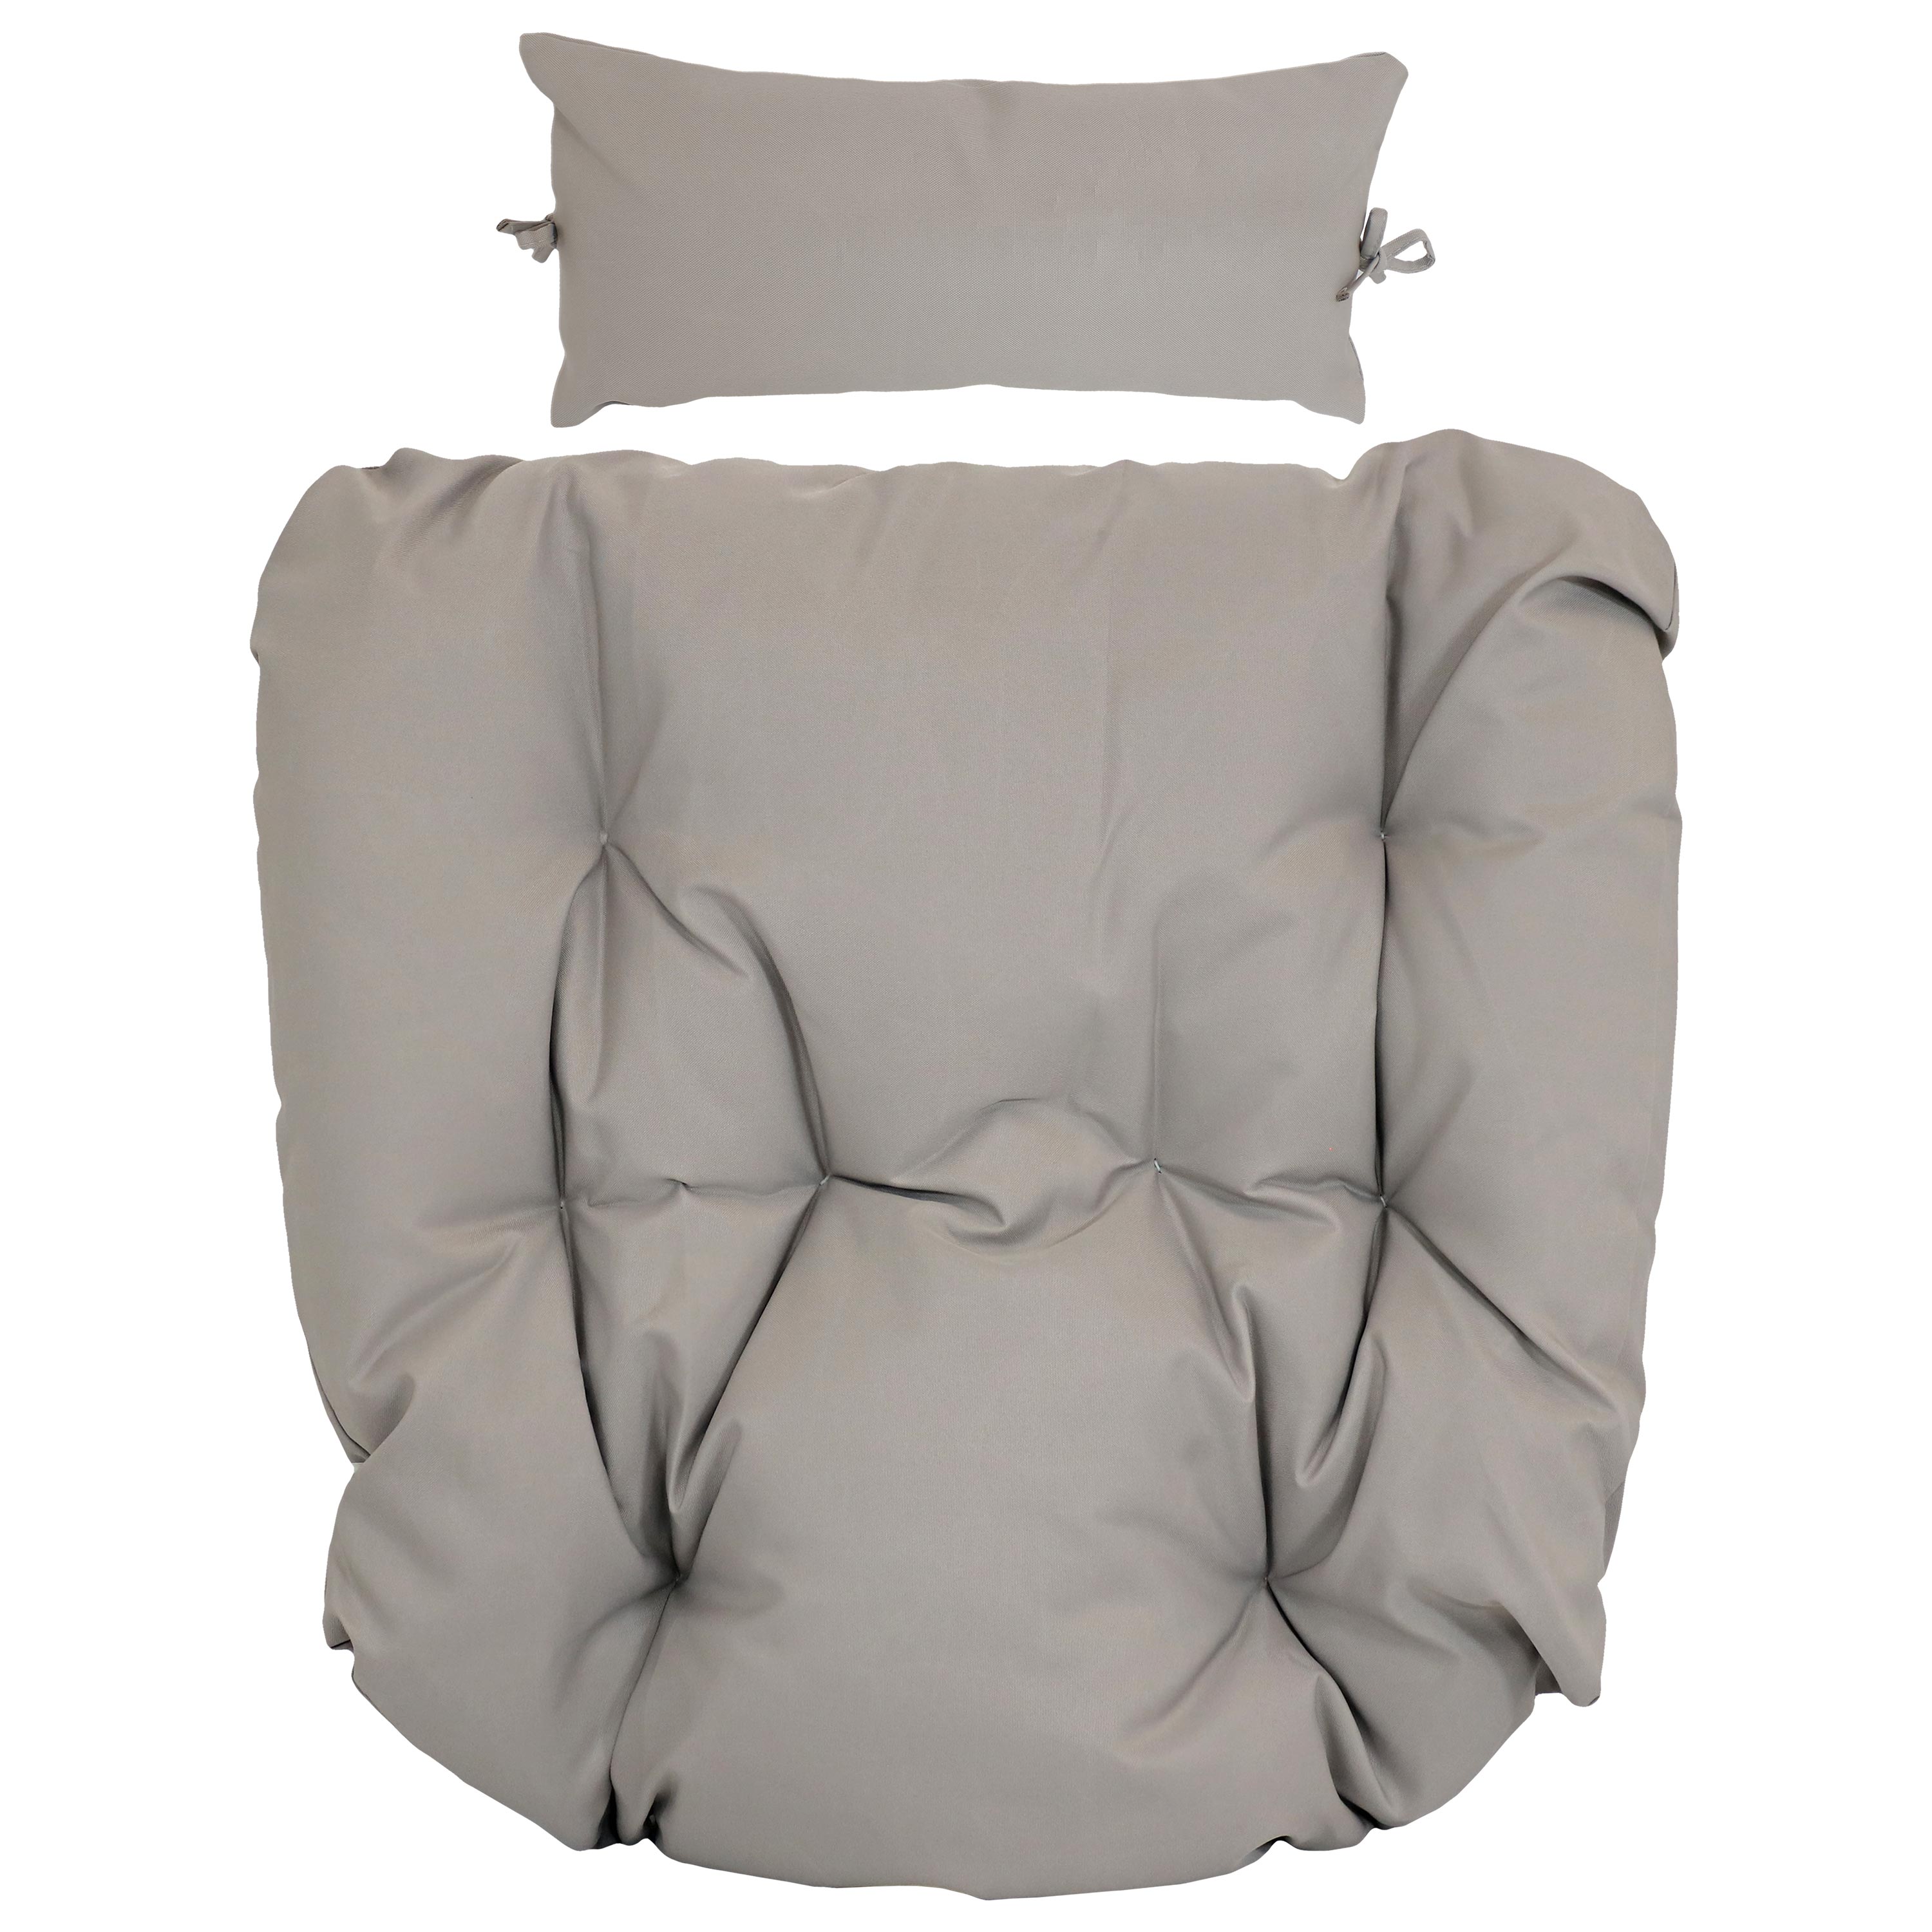 Sunnydaze Replacement Seat Cushion and Headrest Pillow for Caroline Egg Chair - Gray - image 1 of 7